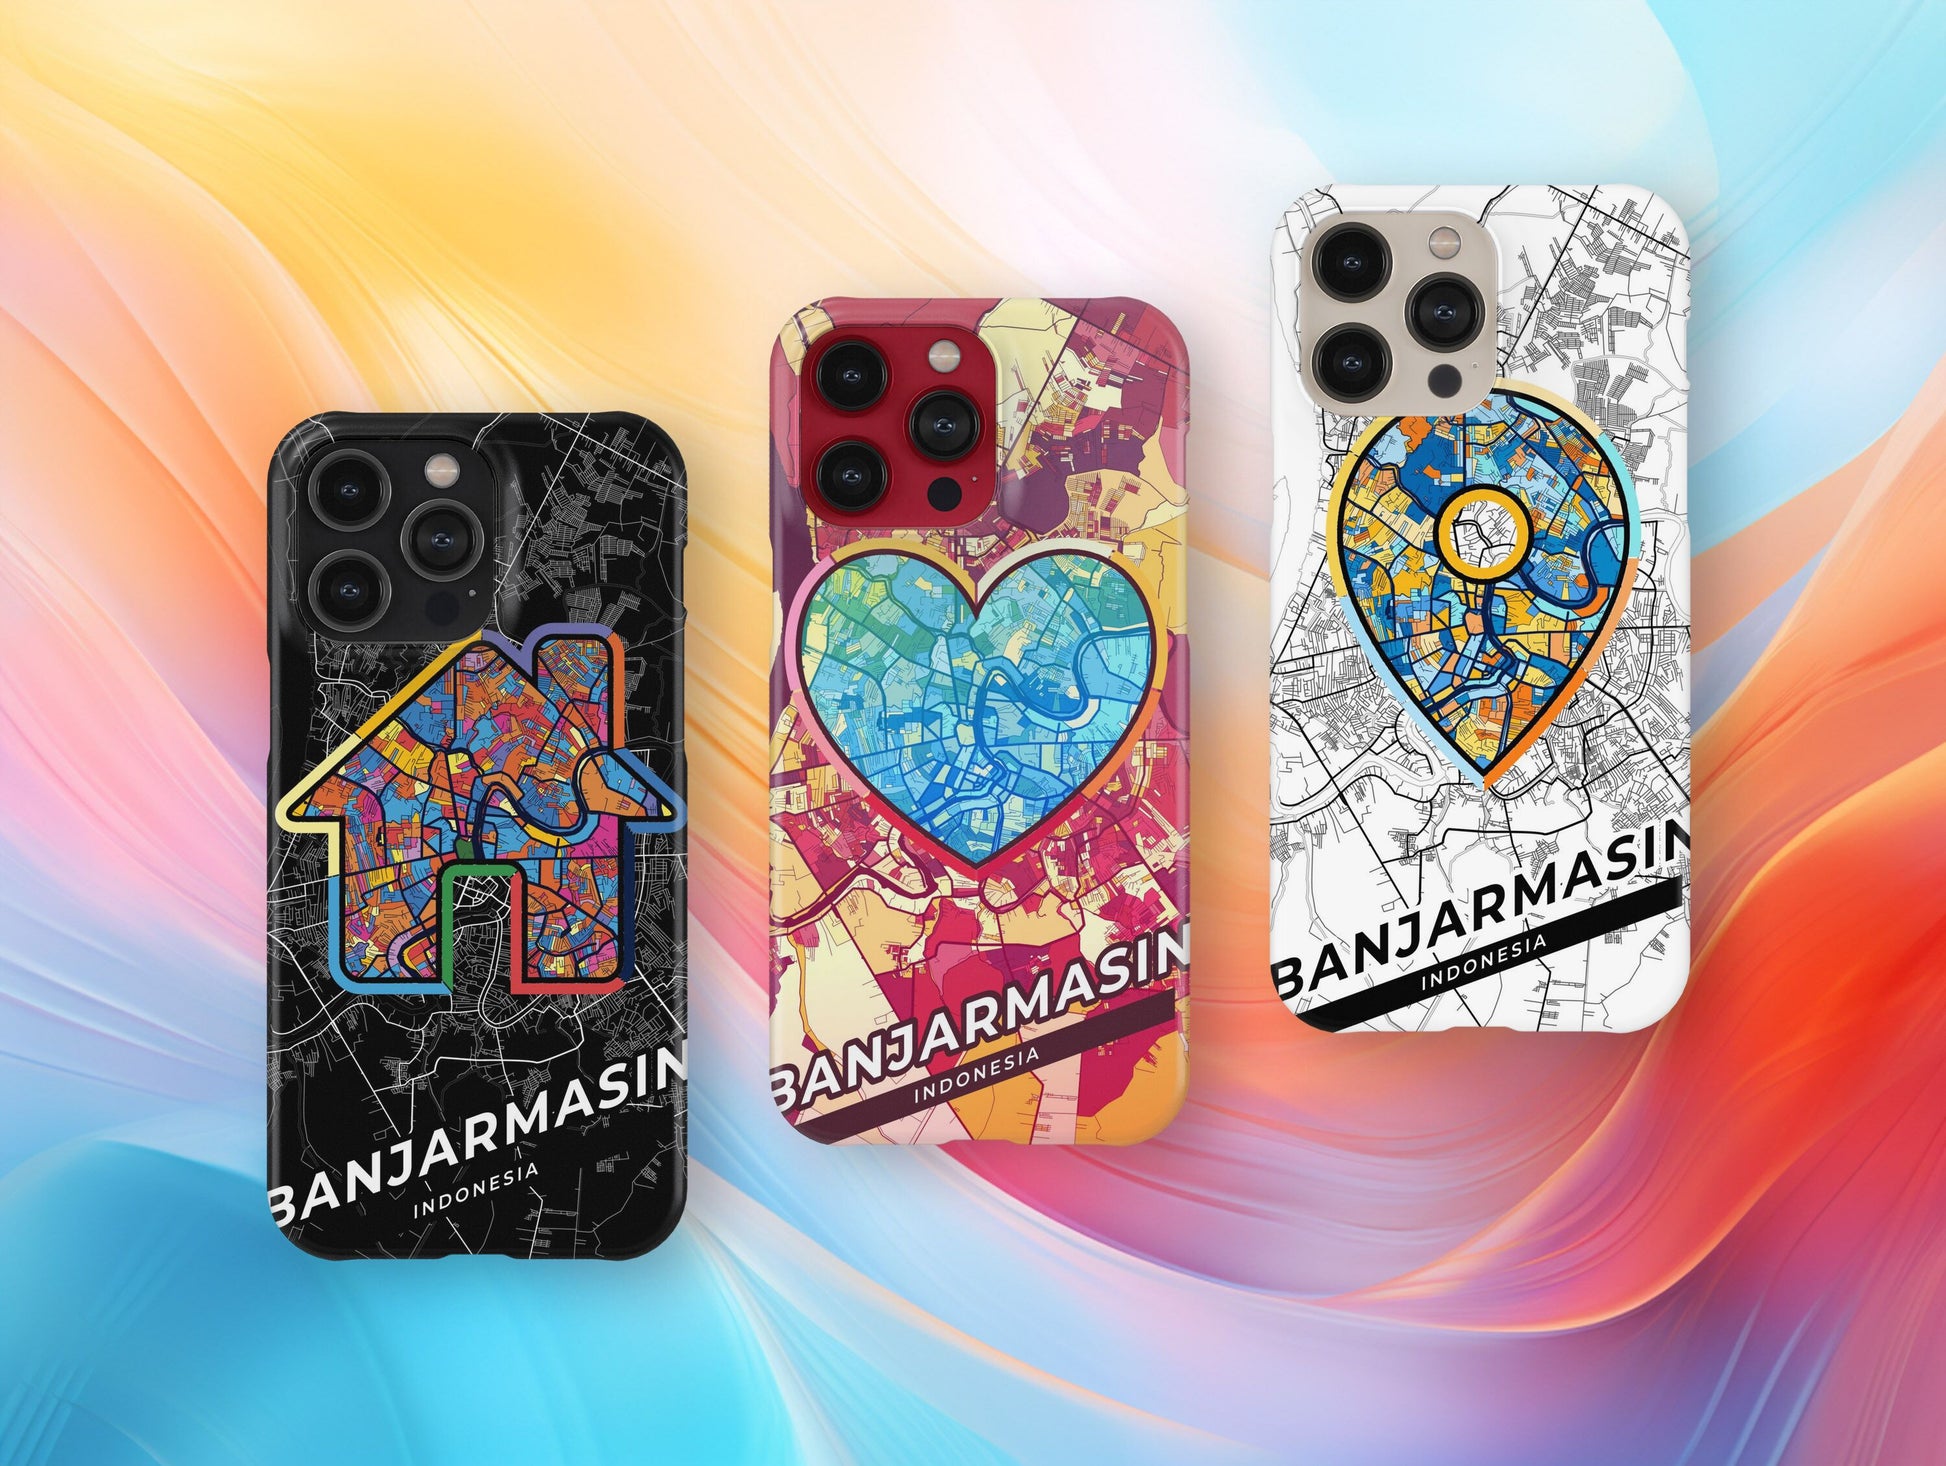 Banjarmasin Indonesia slim phone case with colorful icon. Birthday, wedding or housewarming gift. Couple match cases.